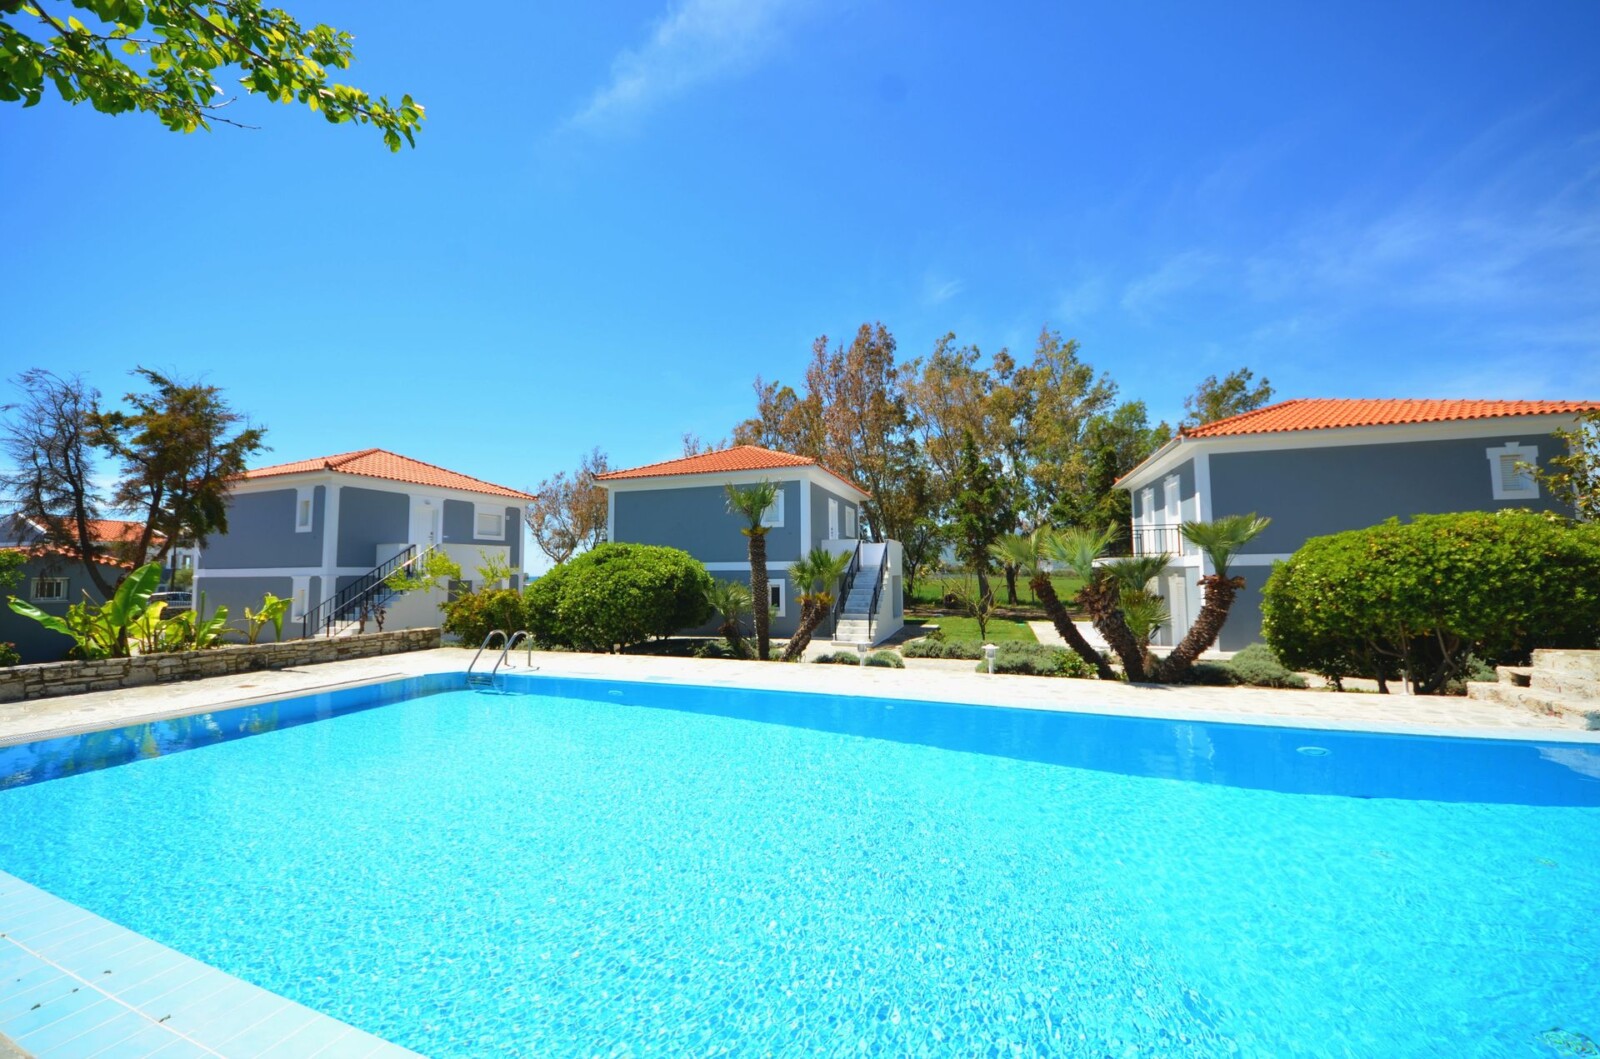 The sapphire pool of Doryssa Coast seafront luxury apartments in Samos